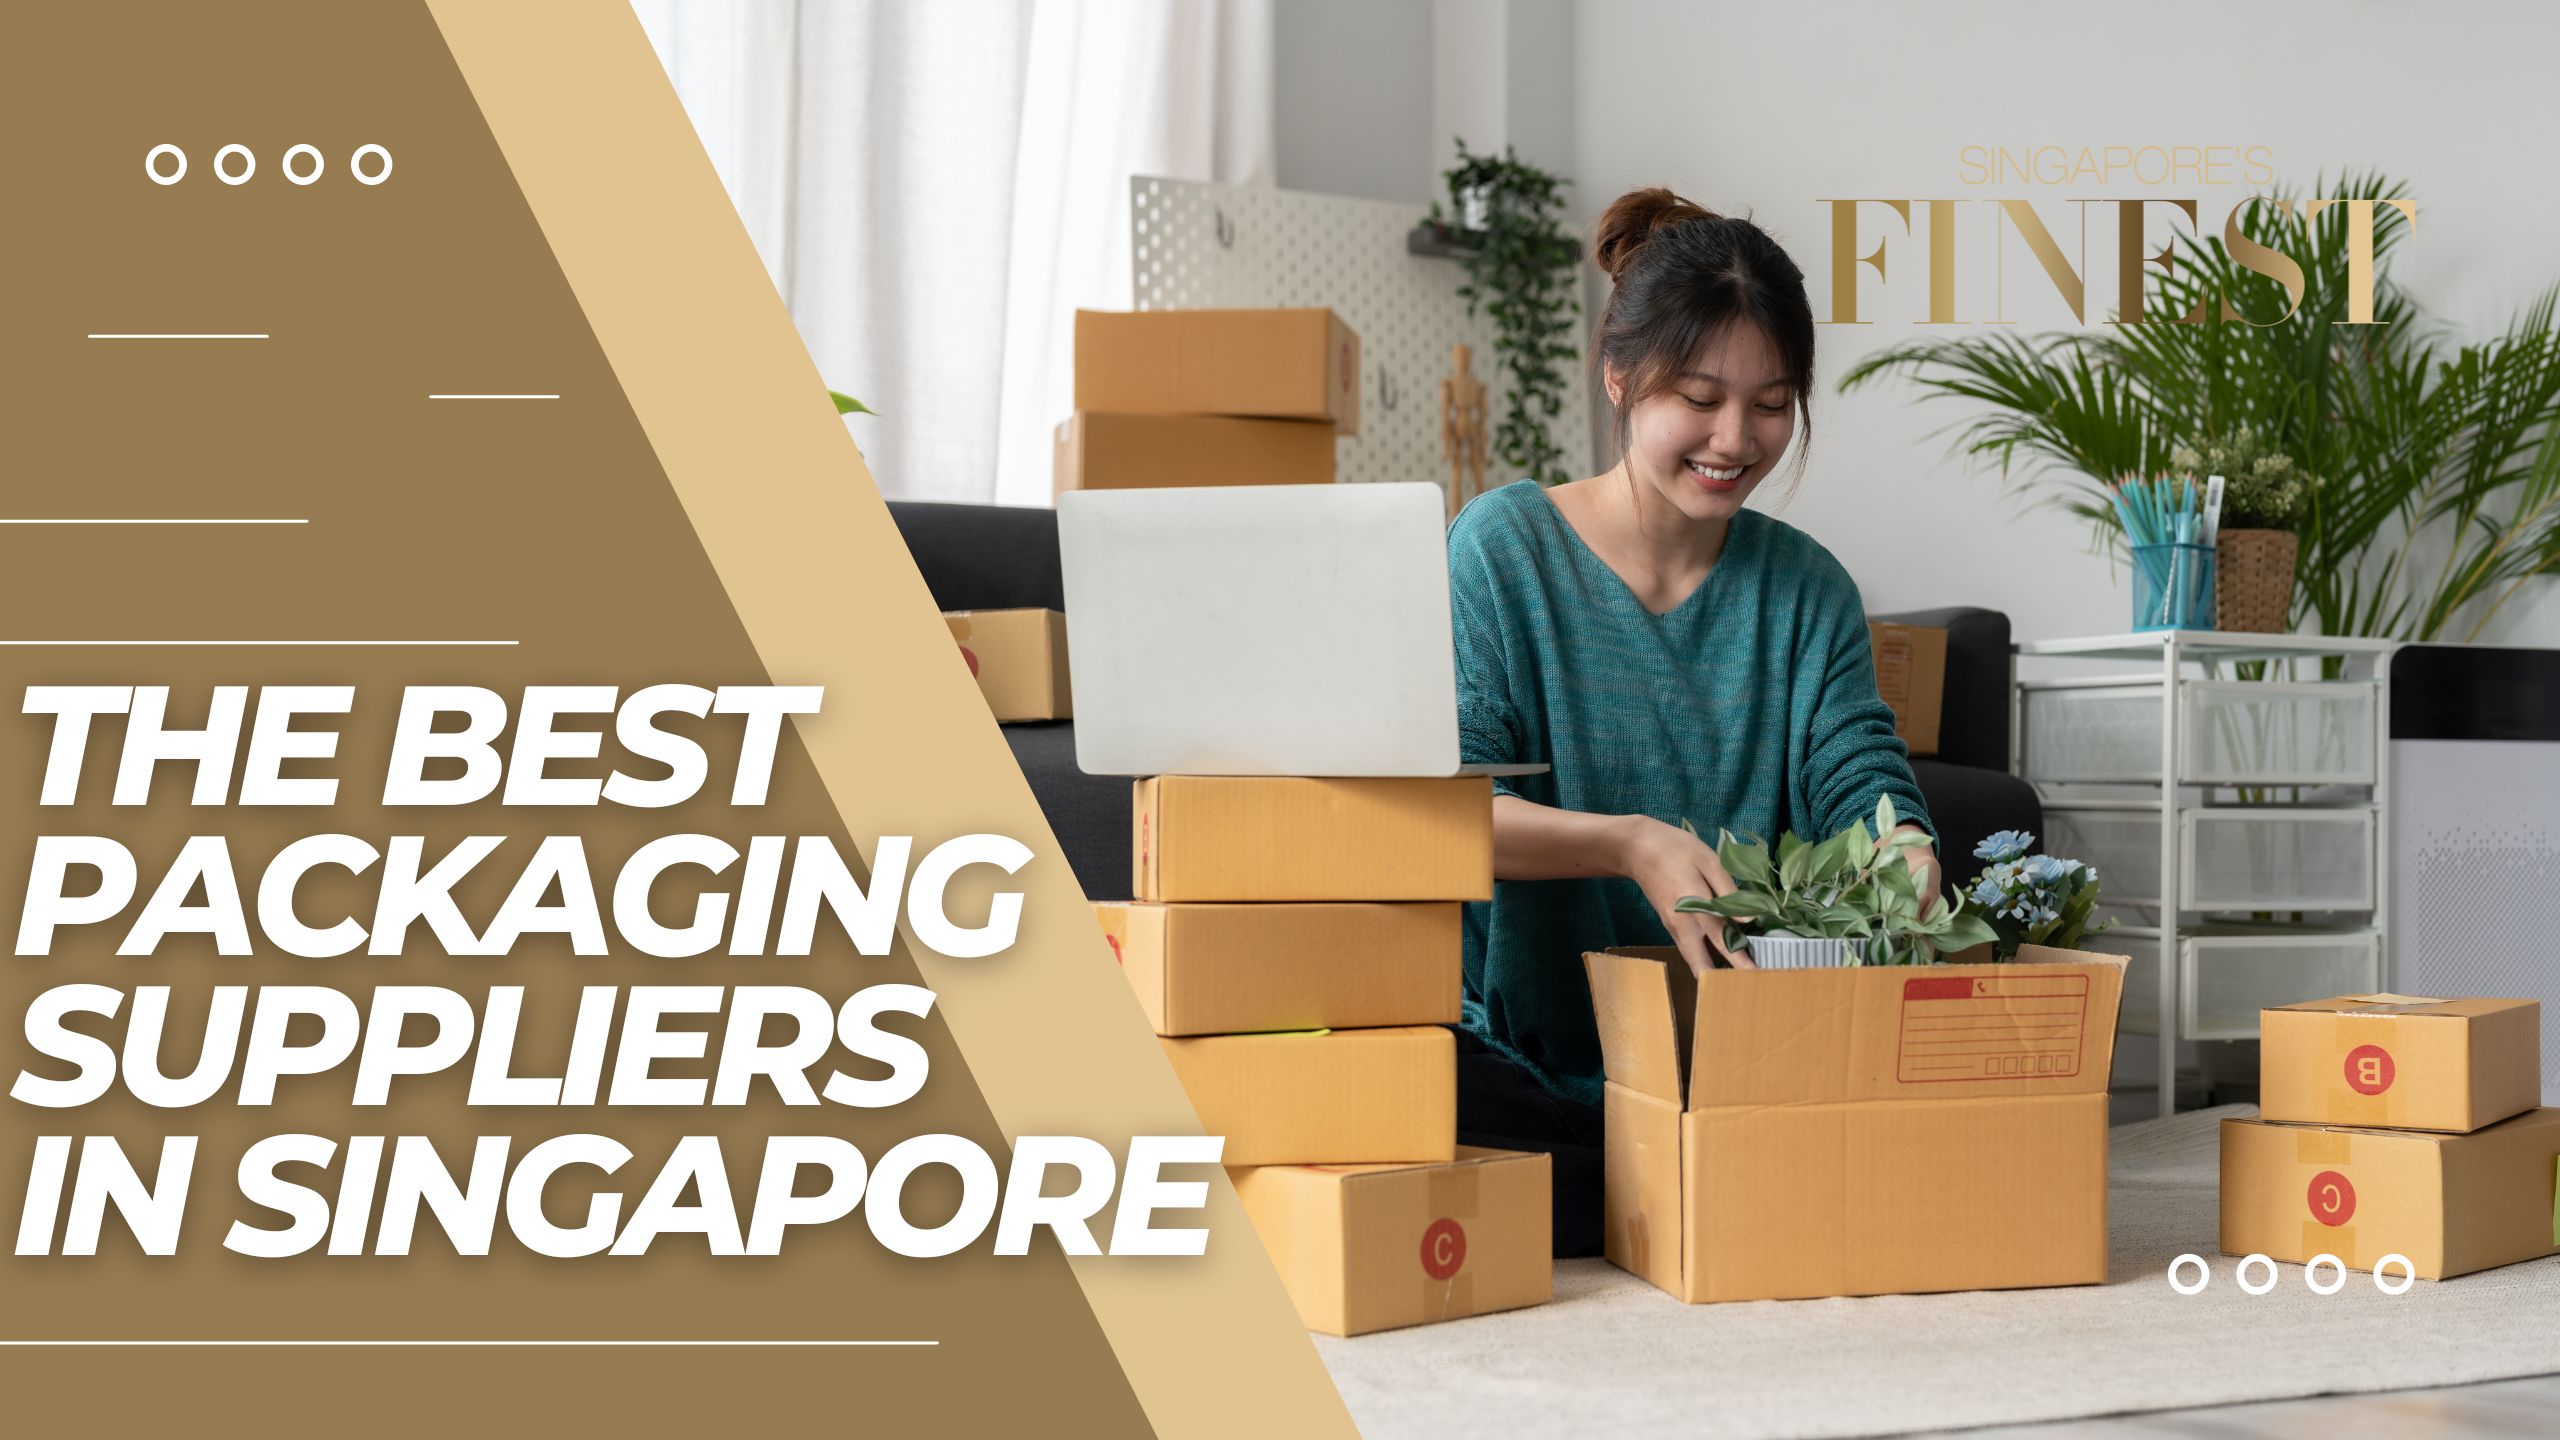 The Finest Packaging Suppliers in Singapore